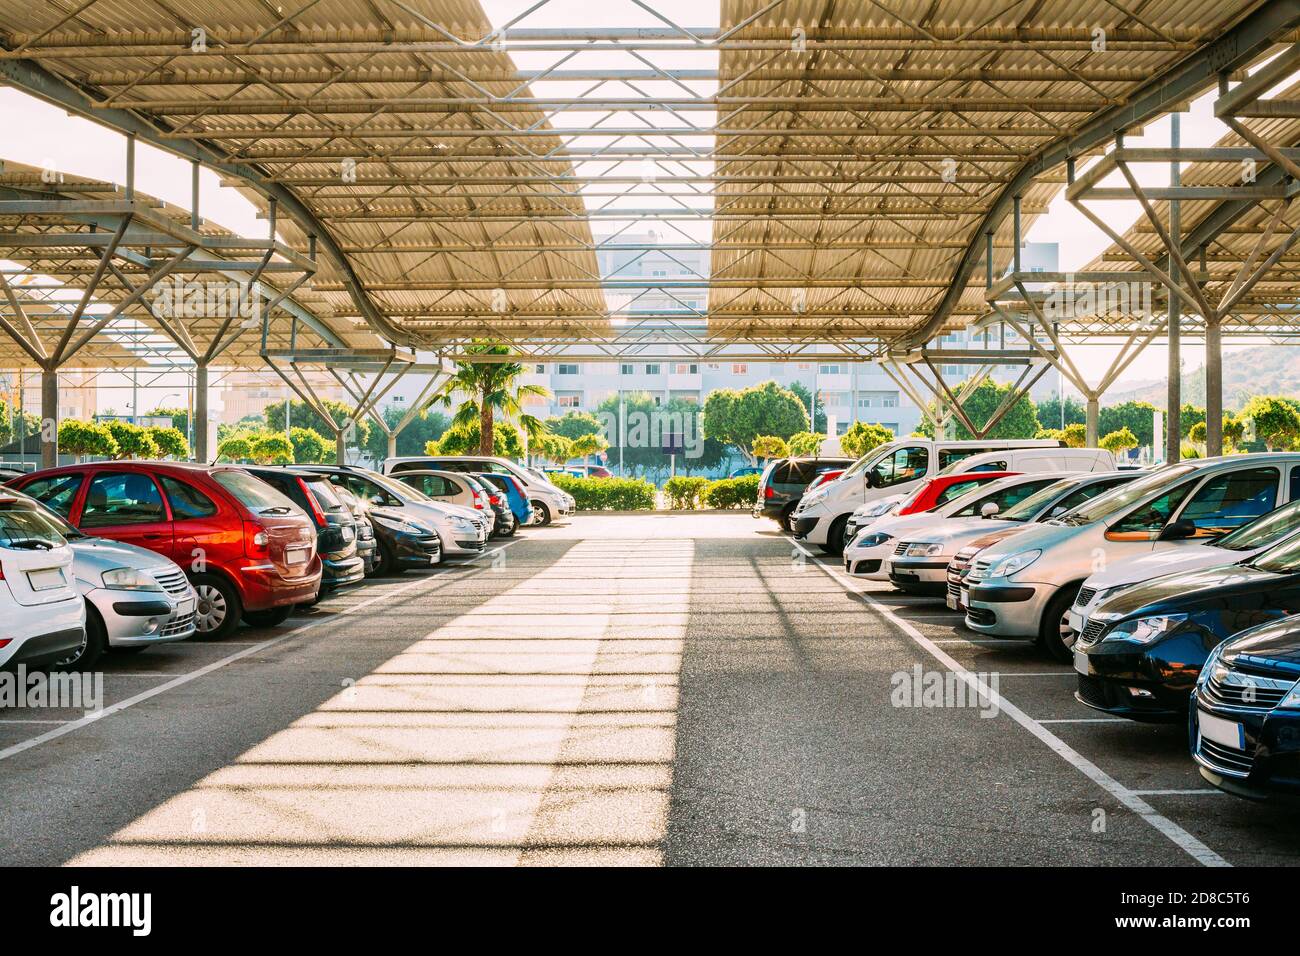 Cars On A Street Parking Lot Under Cover In Sunny Summer Day Stock Photo